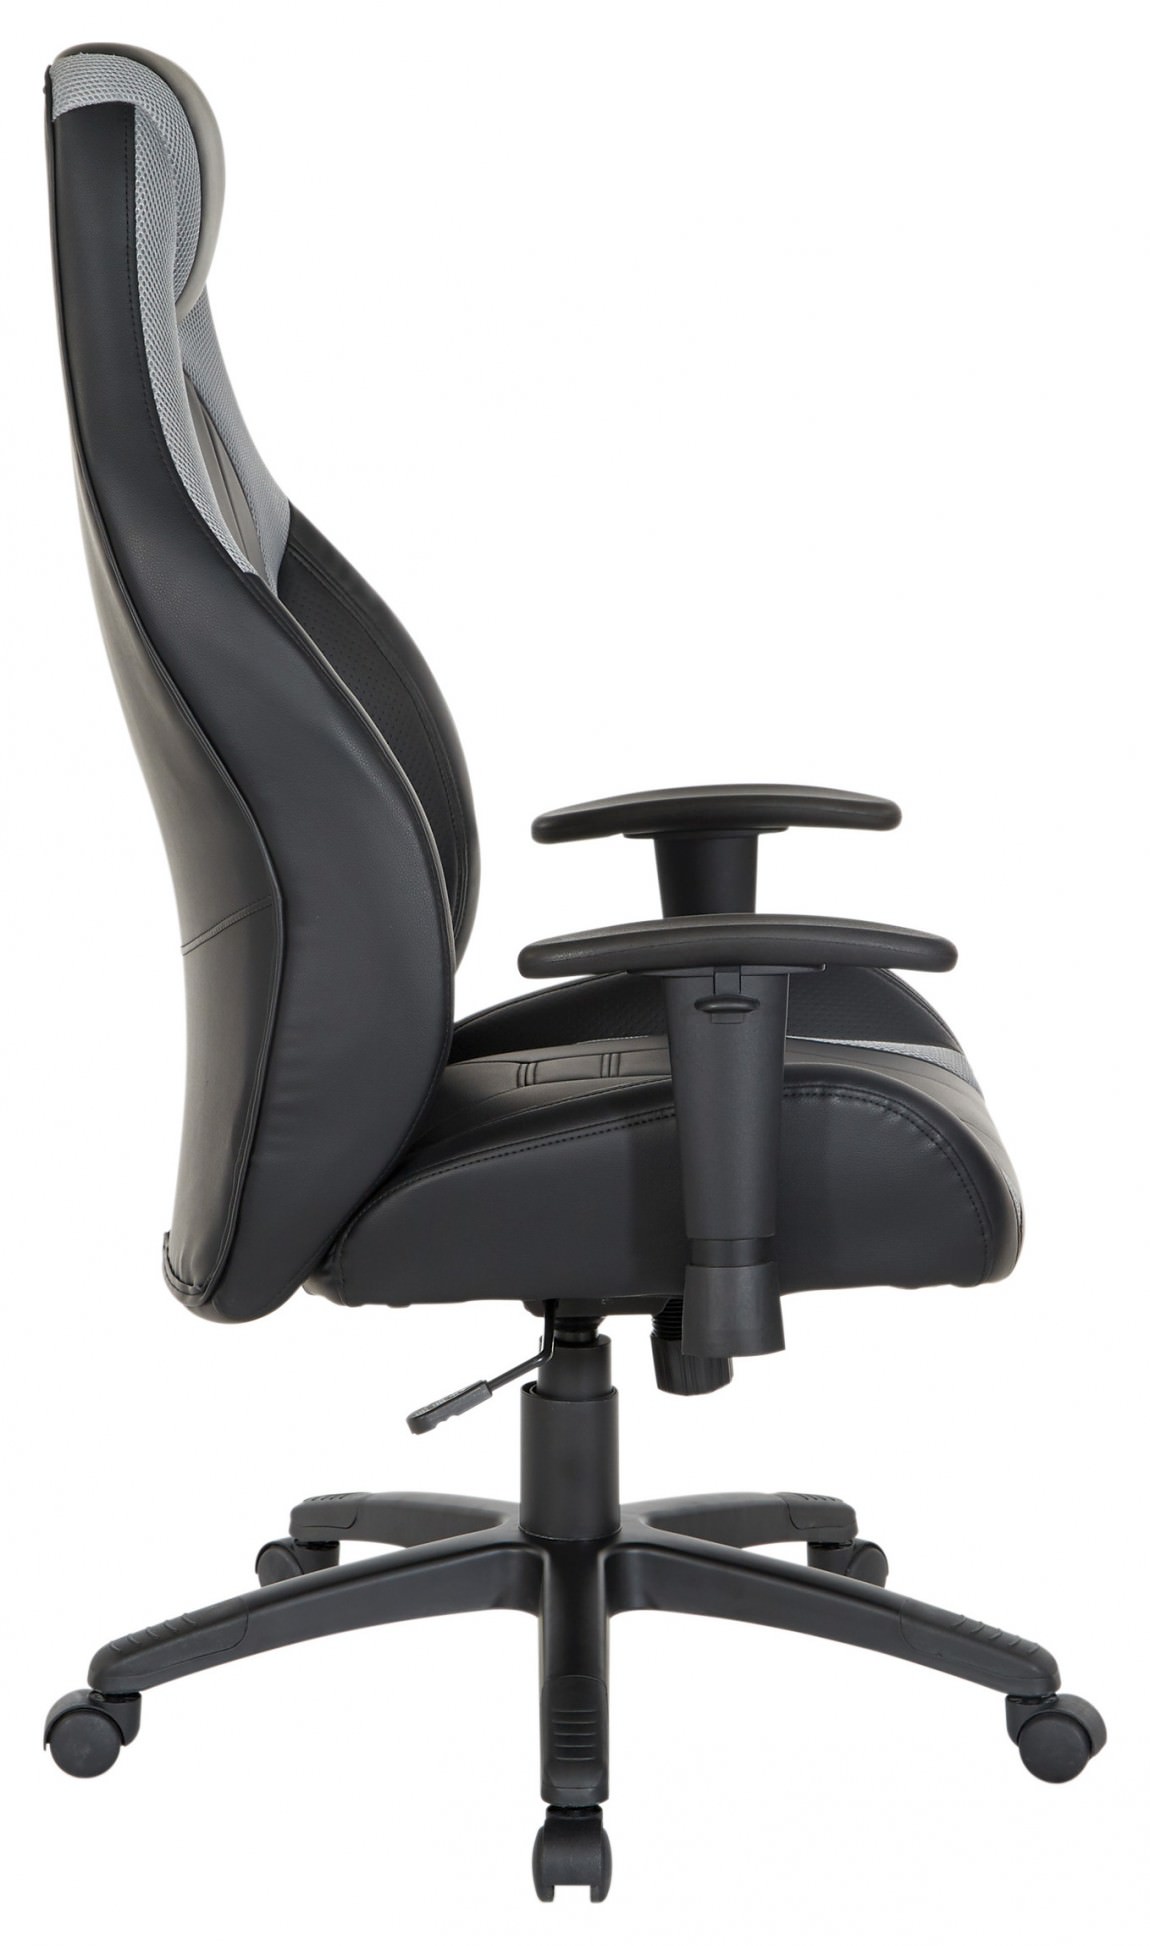 Commander High Back Gaming Chair